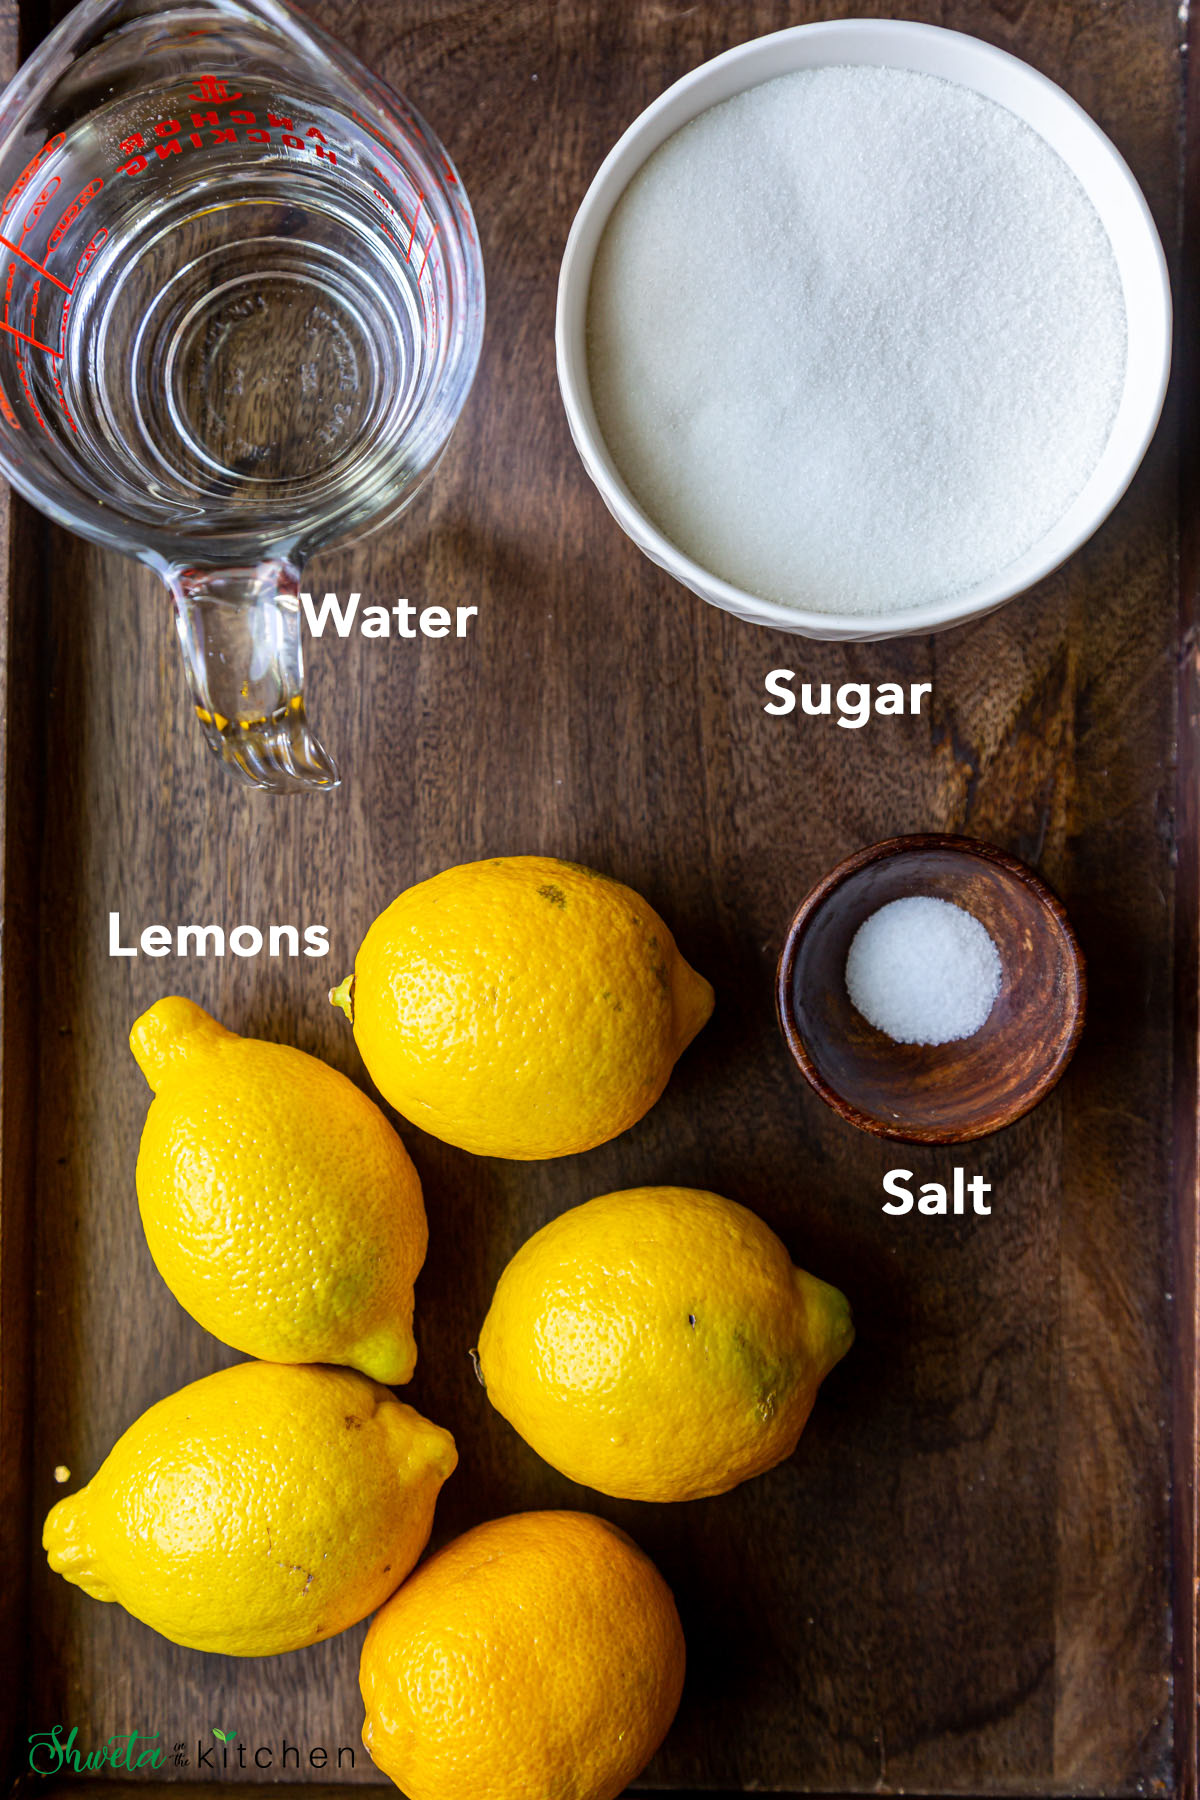 Ingredients for fresh squeezed lemonade arranged on wooden surface